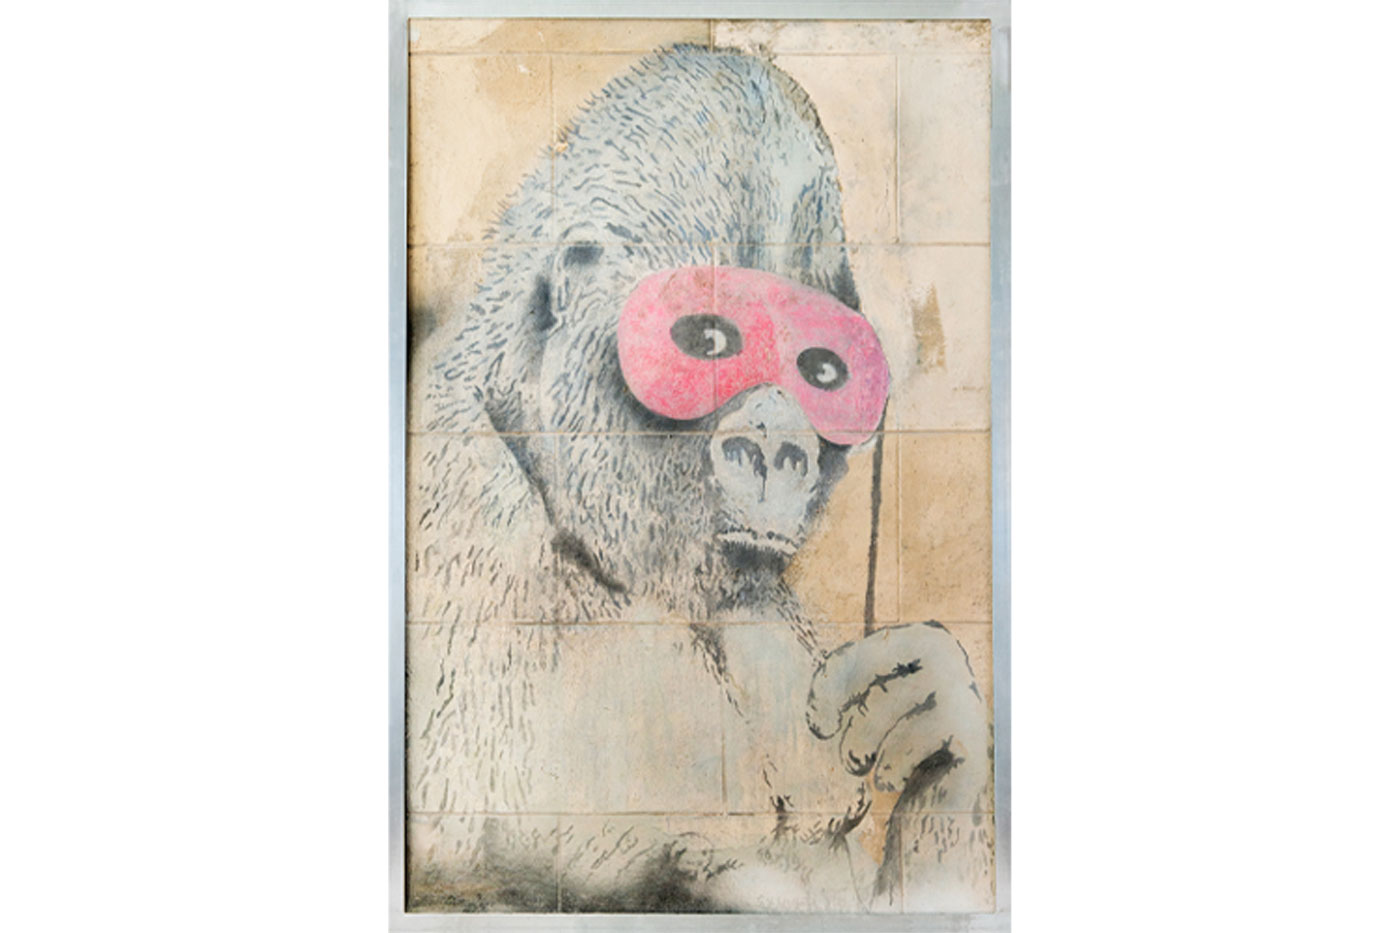 Historic Banksy Piece 'Gorilla in a Pink Mask' Set To Be Offered as an NFT bristol uk opensea nft non fungible token cryptocurrency crypto queen elizabeth